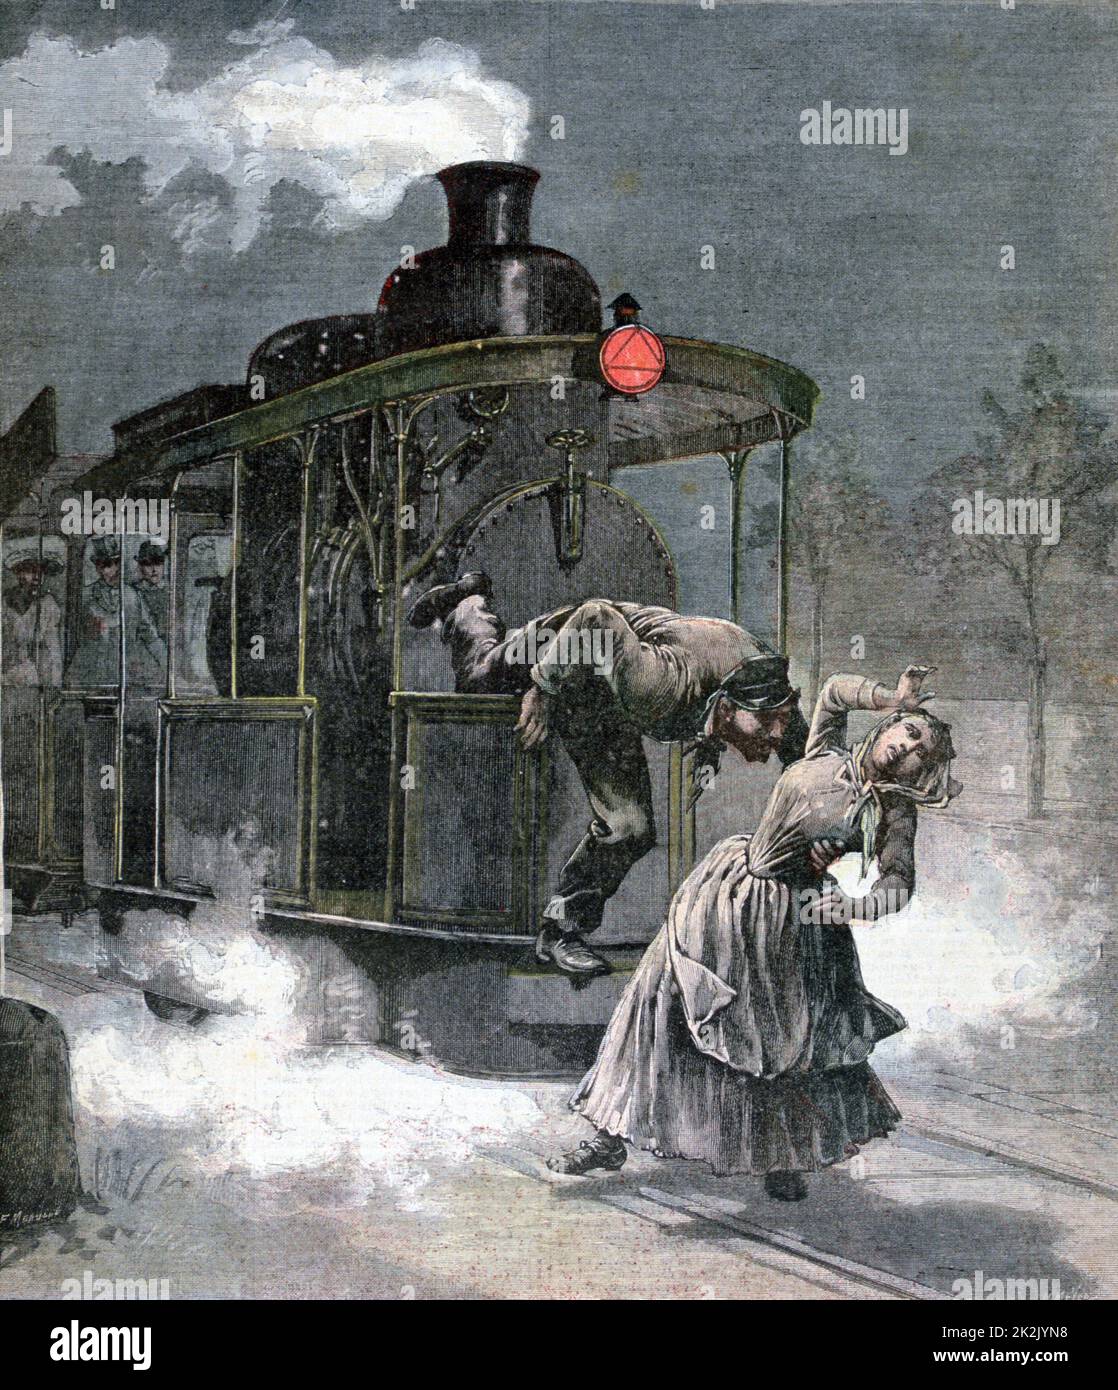 Tragic accident at Marly-le-Roi on the Paris-Saint-Germain railway, France.  The engine driver trying to save a woman walking on the line.  Both were killed.  From 'Le Petit Journal', Paris, 14 November 1891. Stock Photo